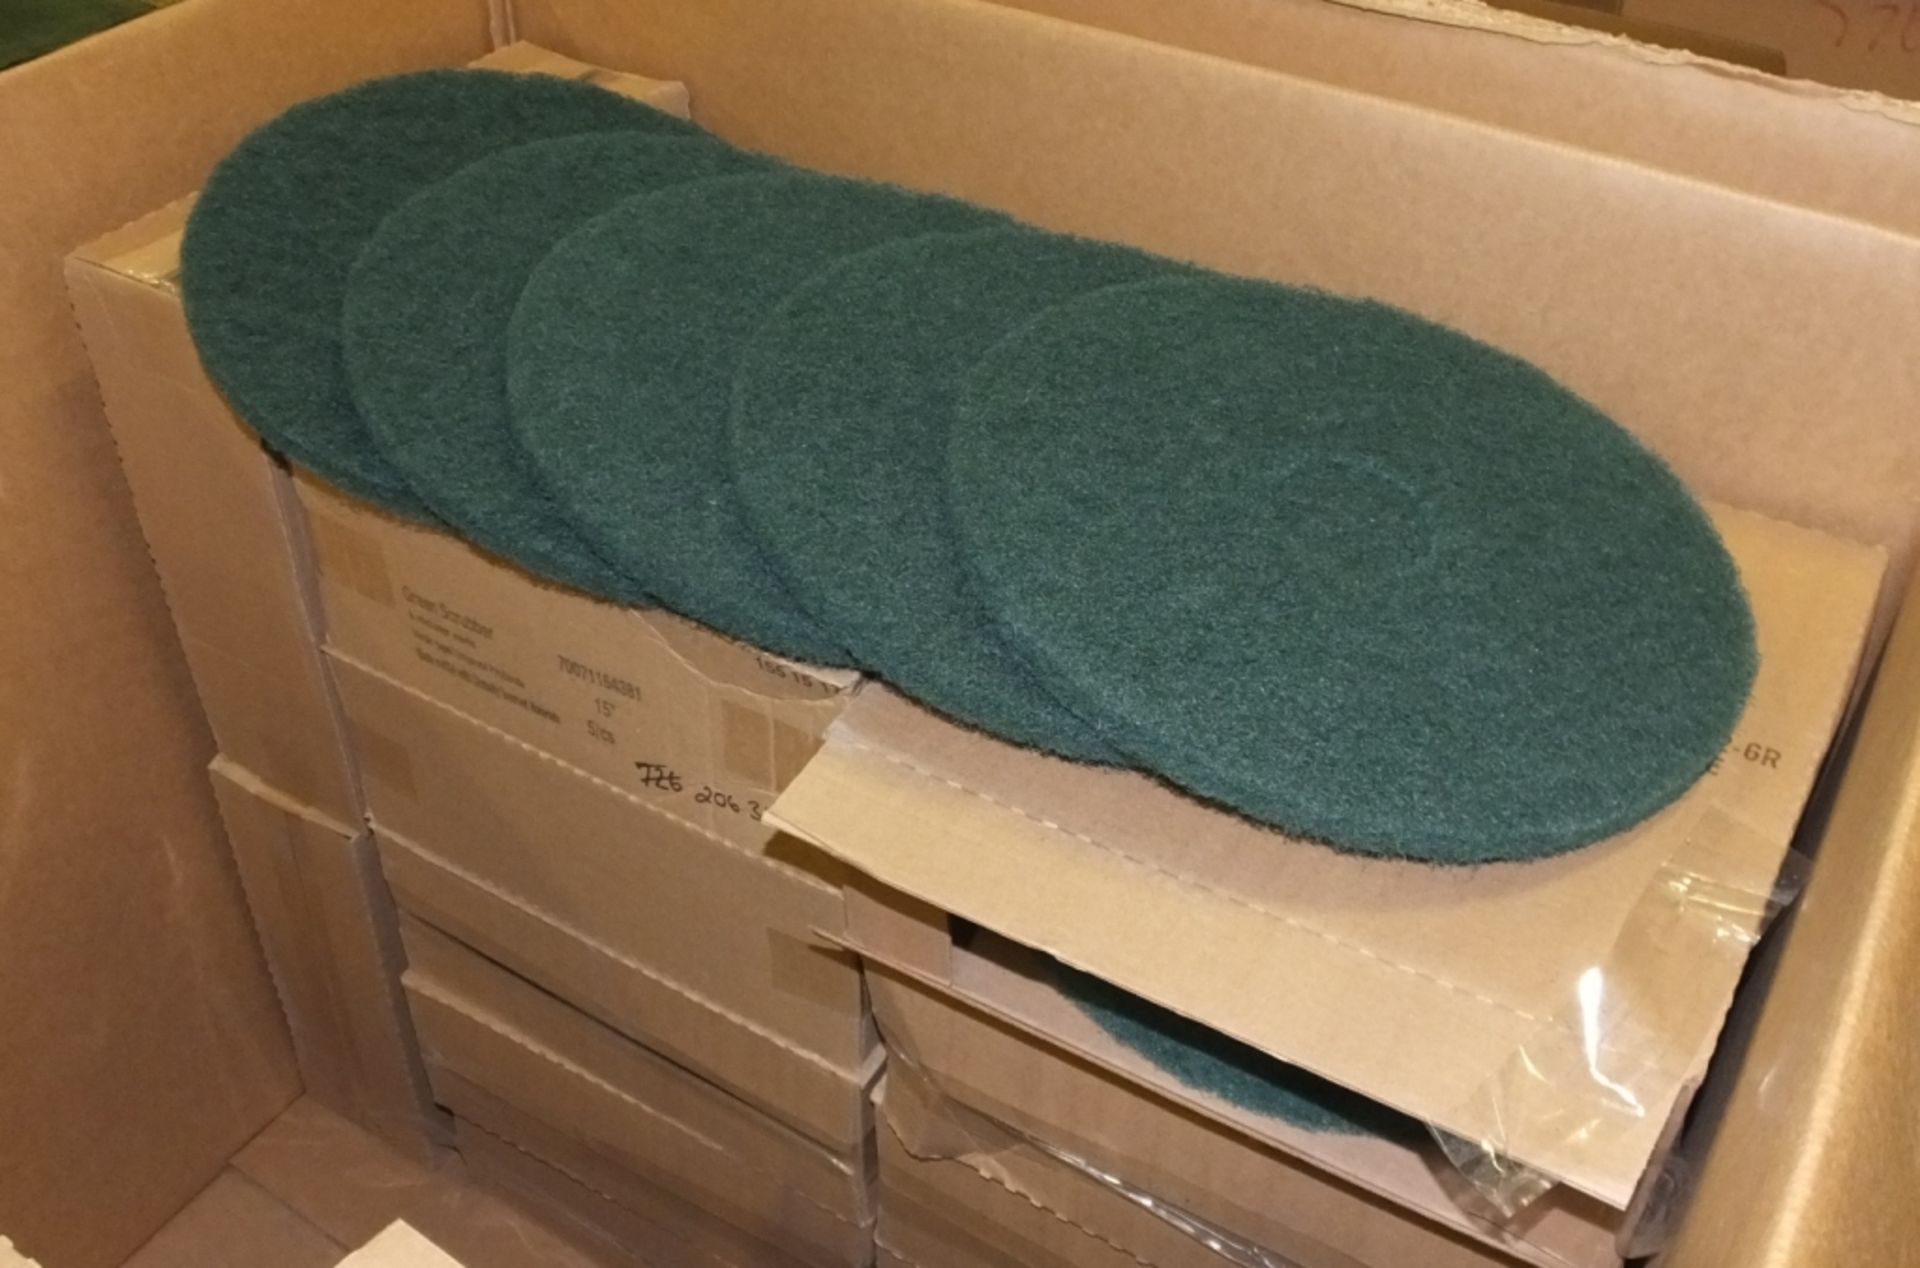 15" Green Scrubber Pads - 5per Box - 24 boxes - Image 2 of 4